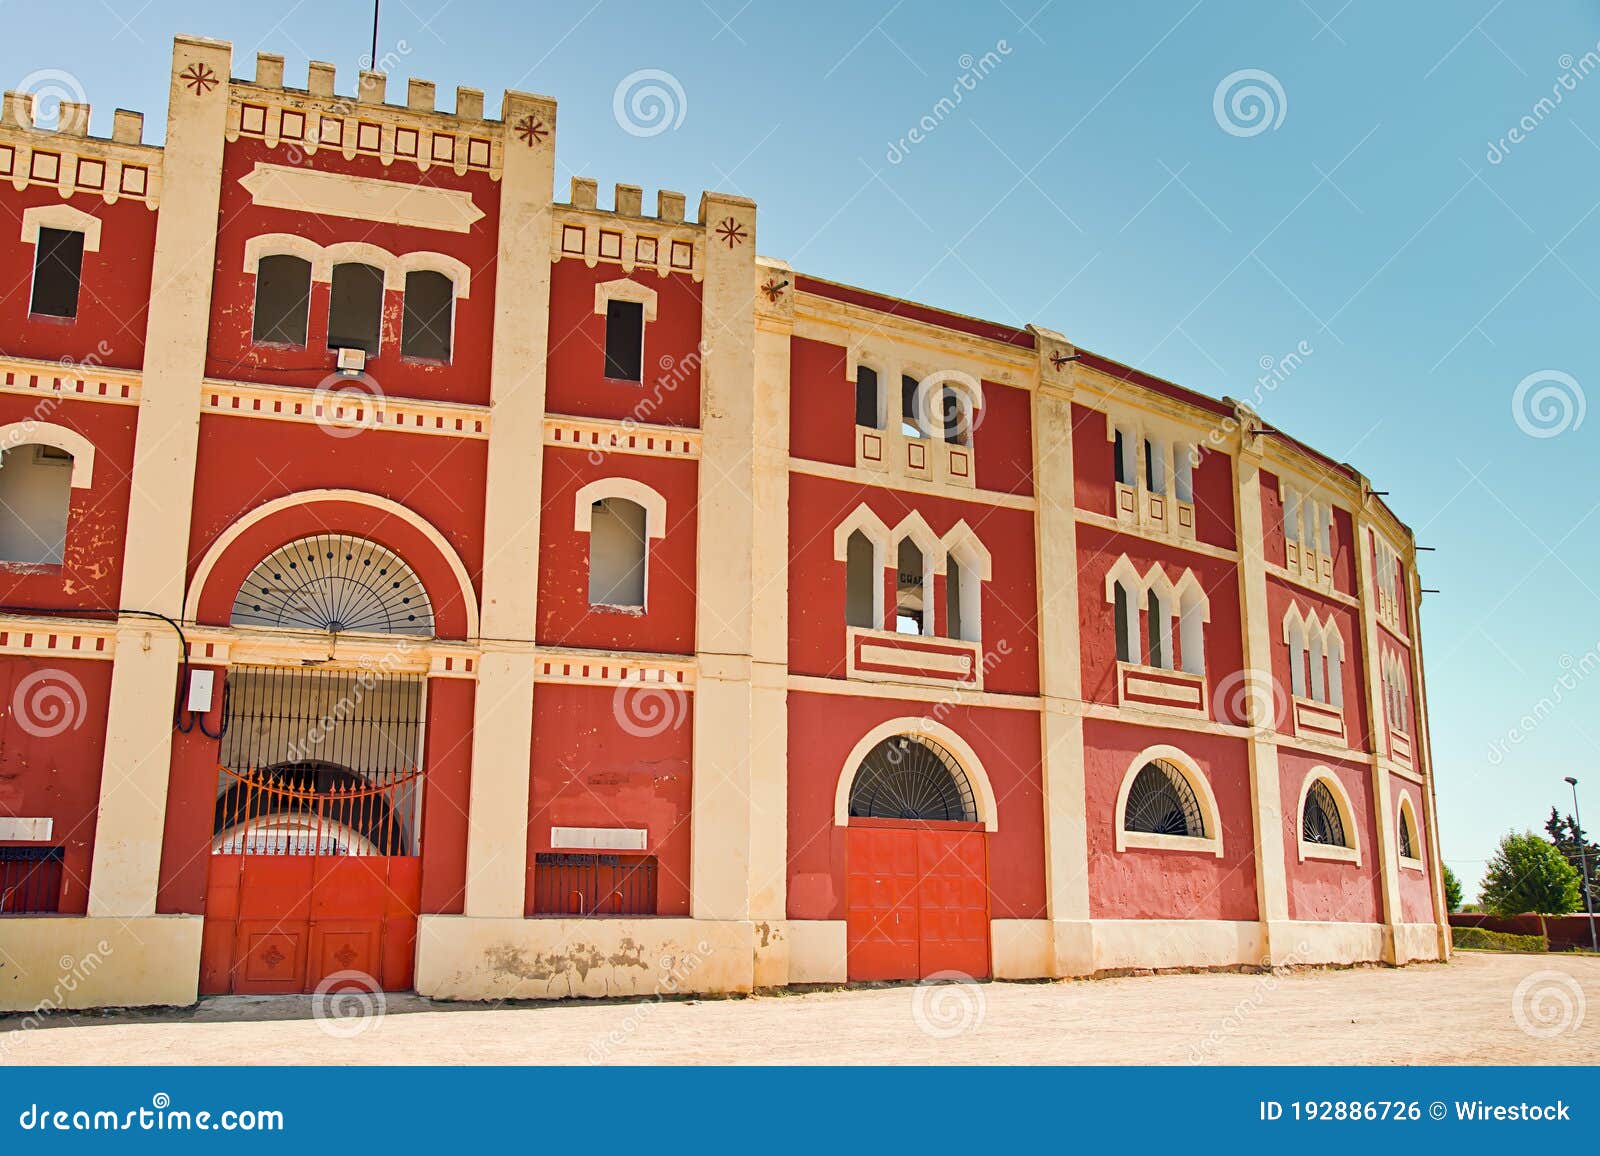 beautiful shot of the roman house of the mitreo under a clear blue sky in merida, spain